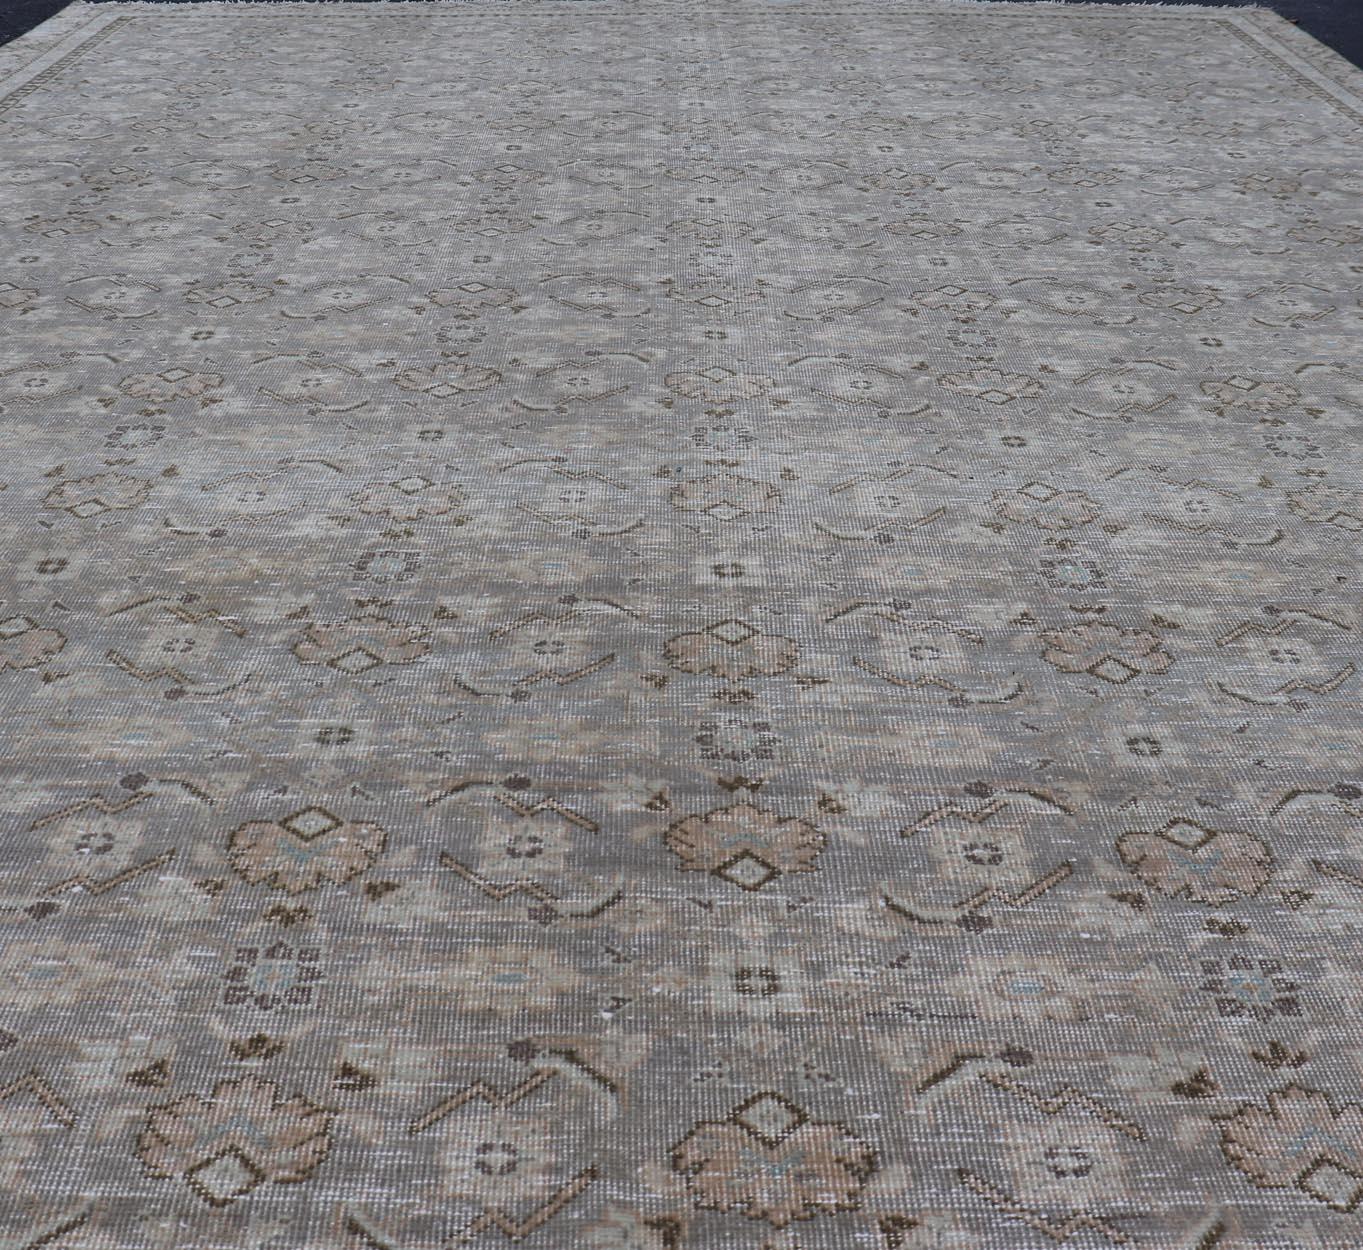 Antique Persian Tabriz Rug in All-Over Herati in Shades of Lavender and Tan  For Sale 5